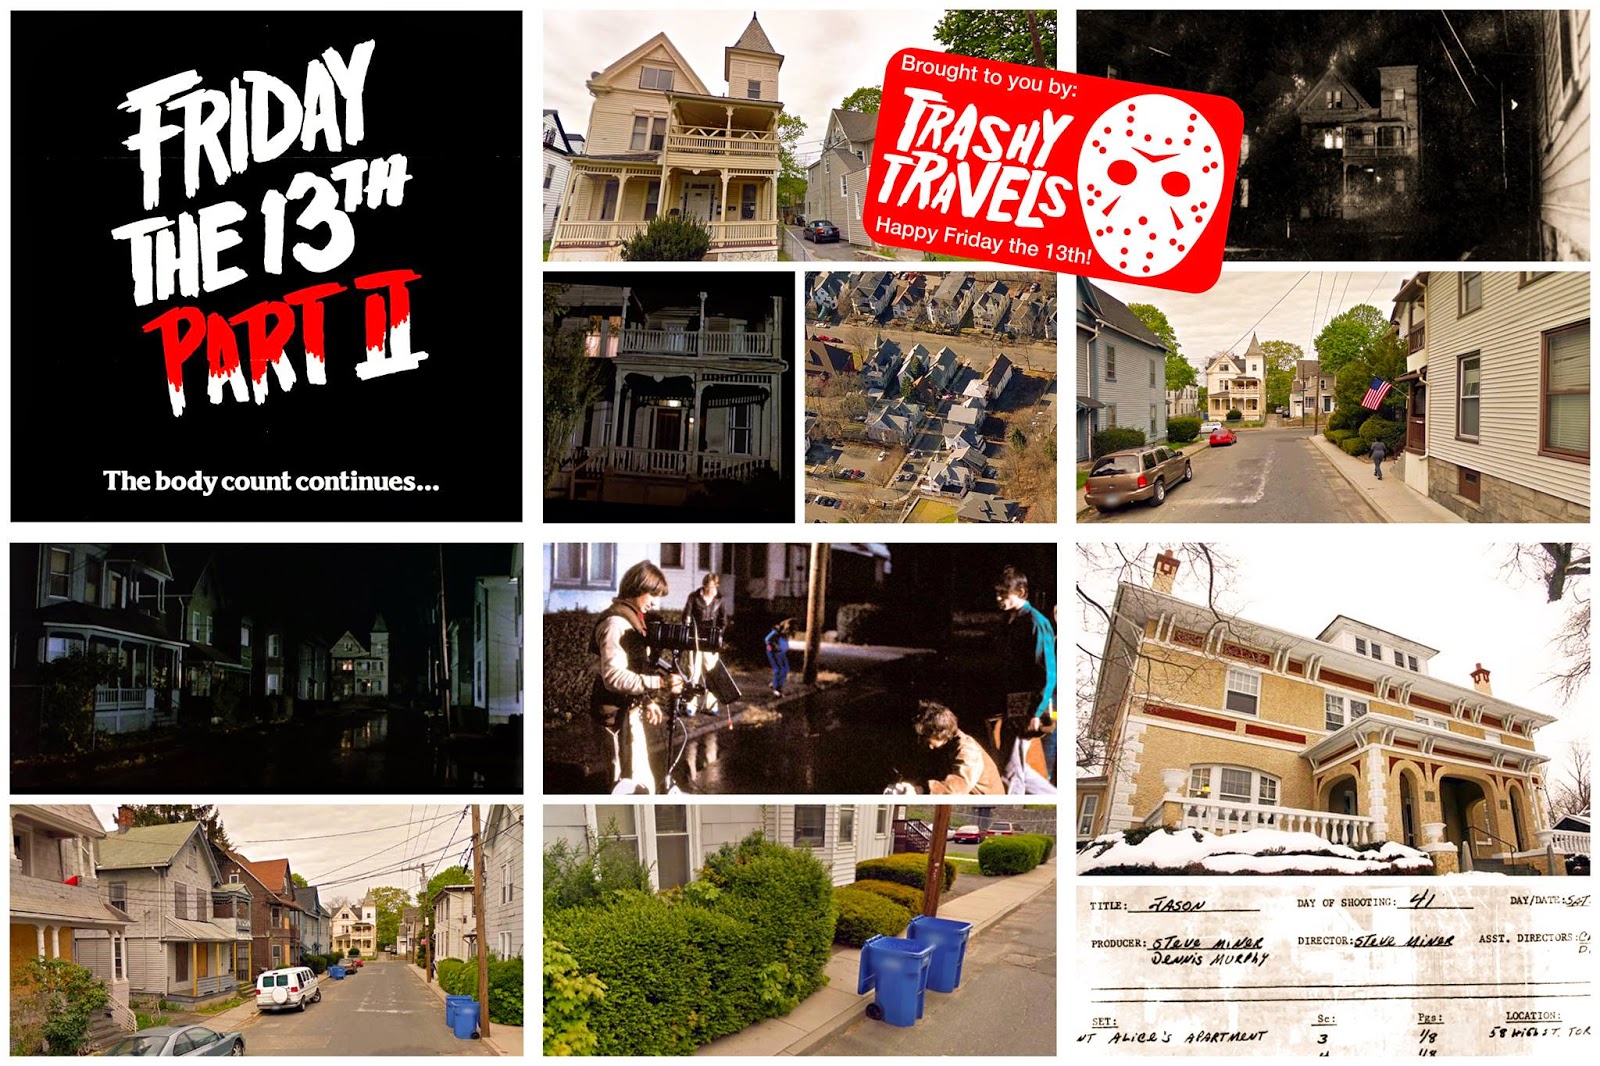 Film Location Information Revealed For Alice's House In 'Friday The 13th Part 2'